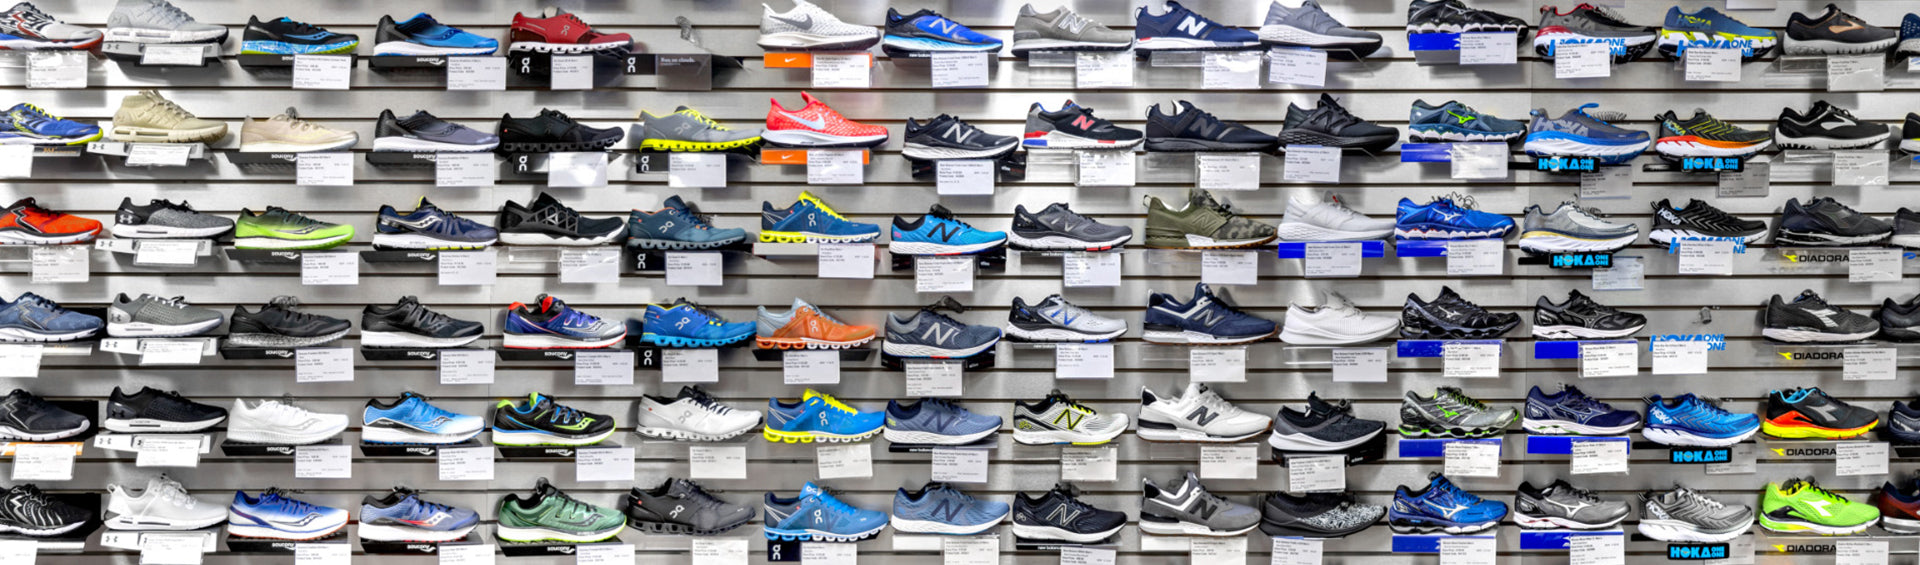 A display of athletic shoes showcasing a diverse collection of styles and colors, arranged neatly on a wall for customers to explore.